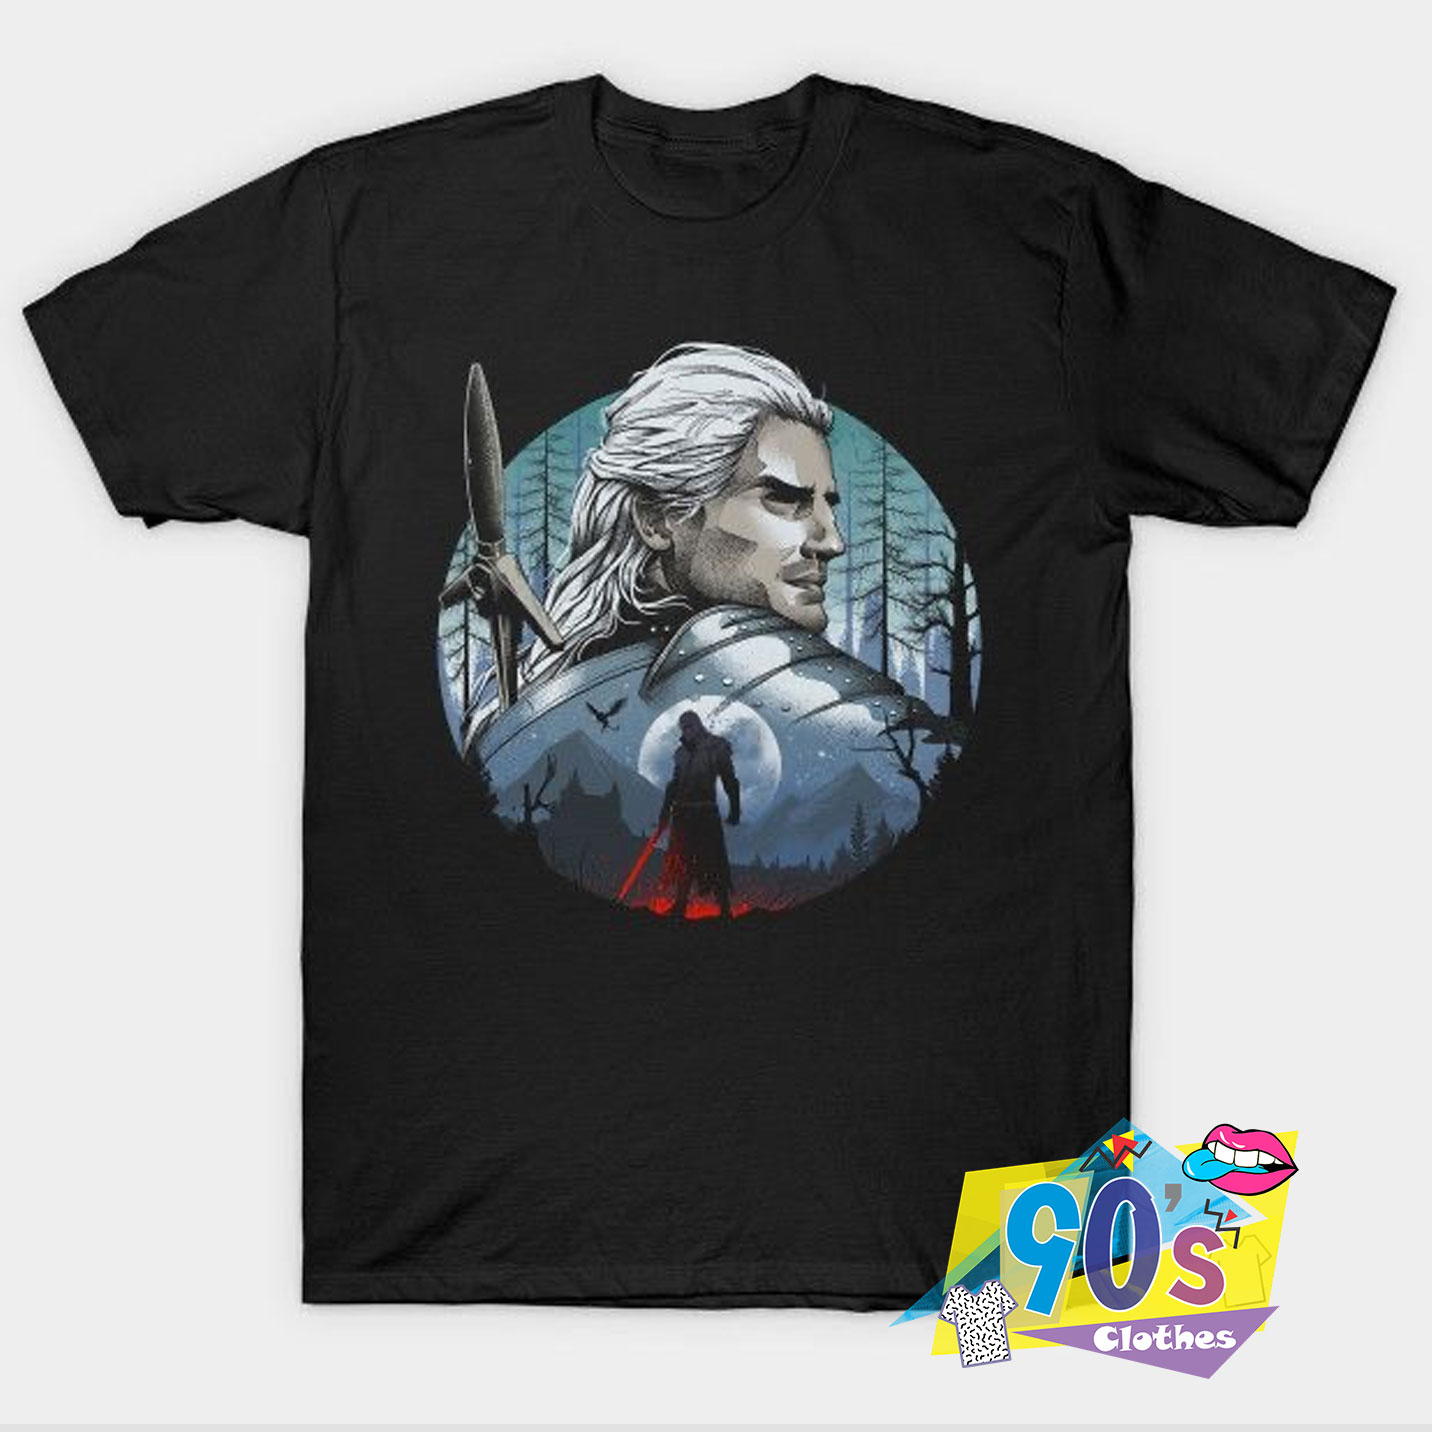 Cheap New Geralt Of Rivia Wild Hunter T Shirt On Sale - 90sclothes